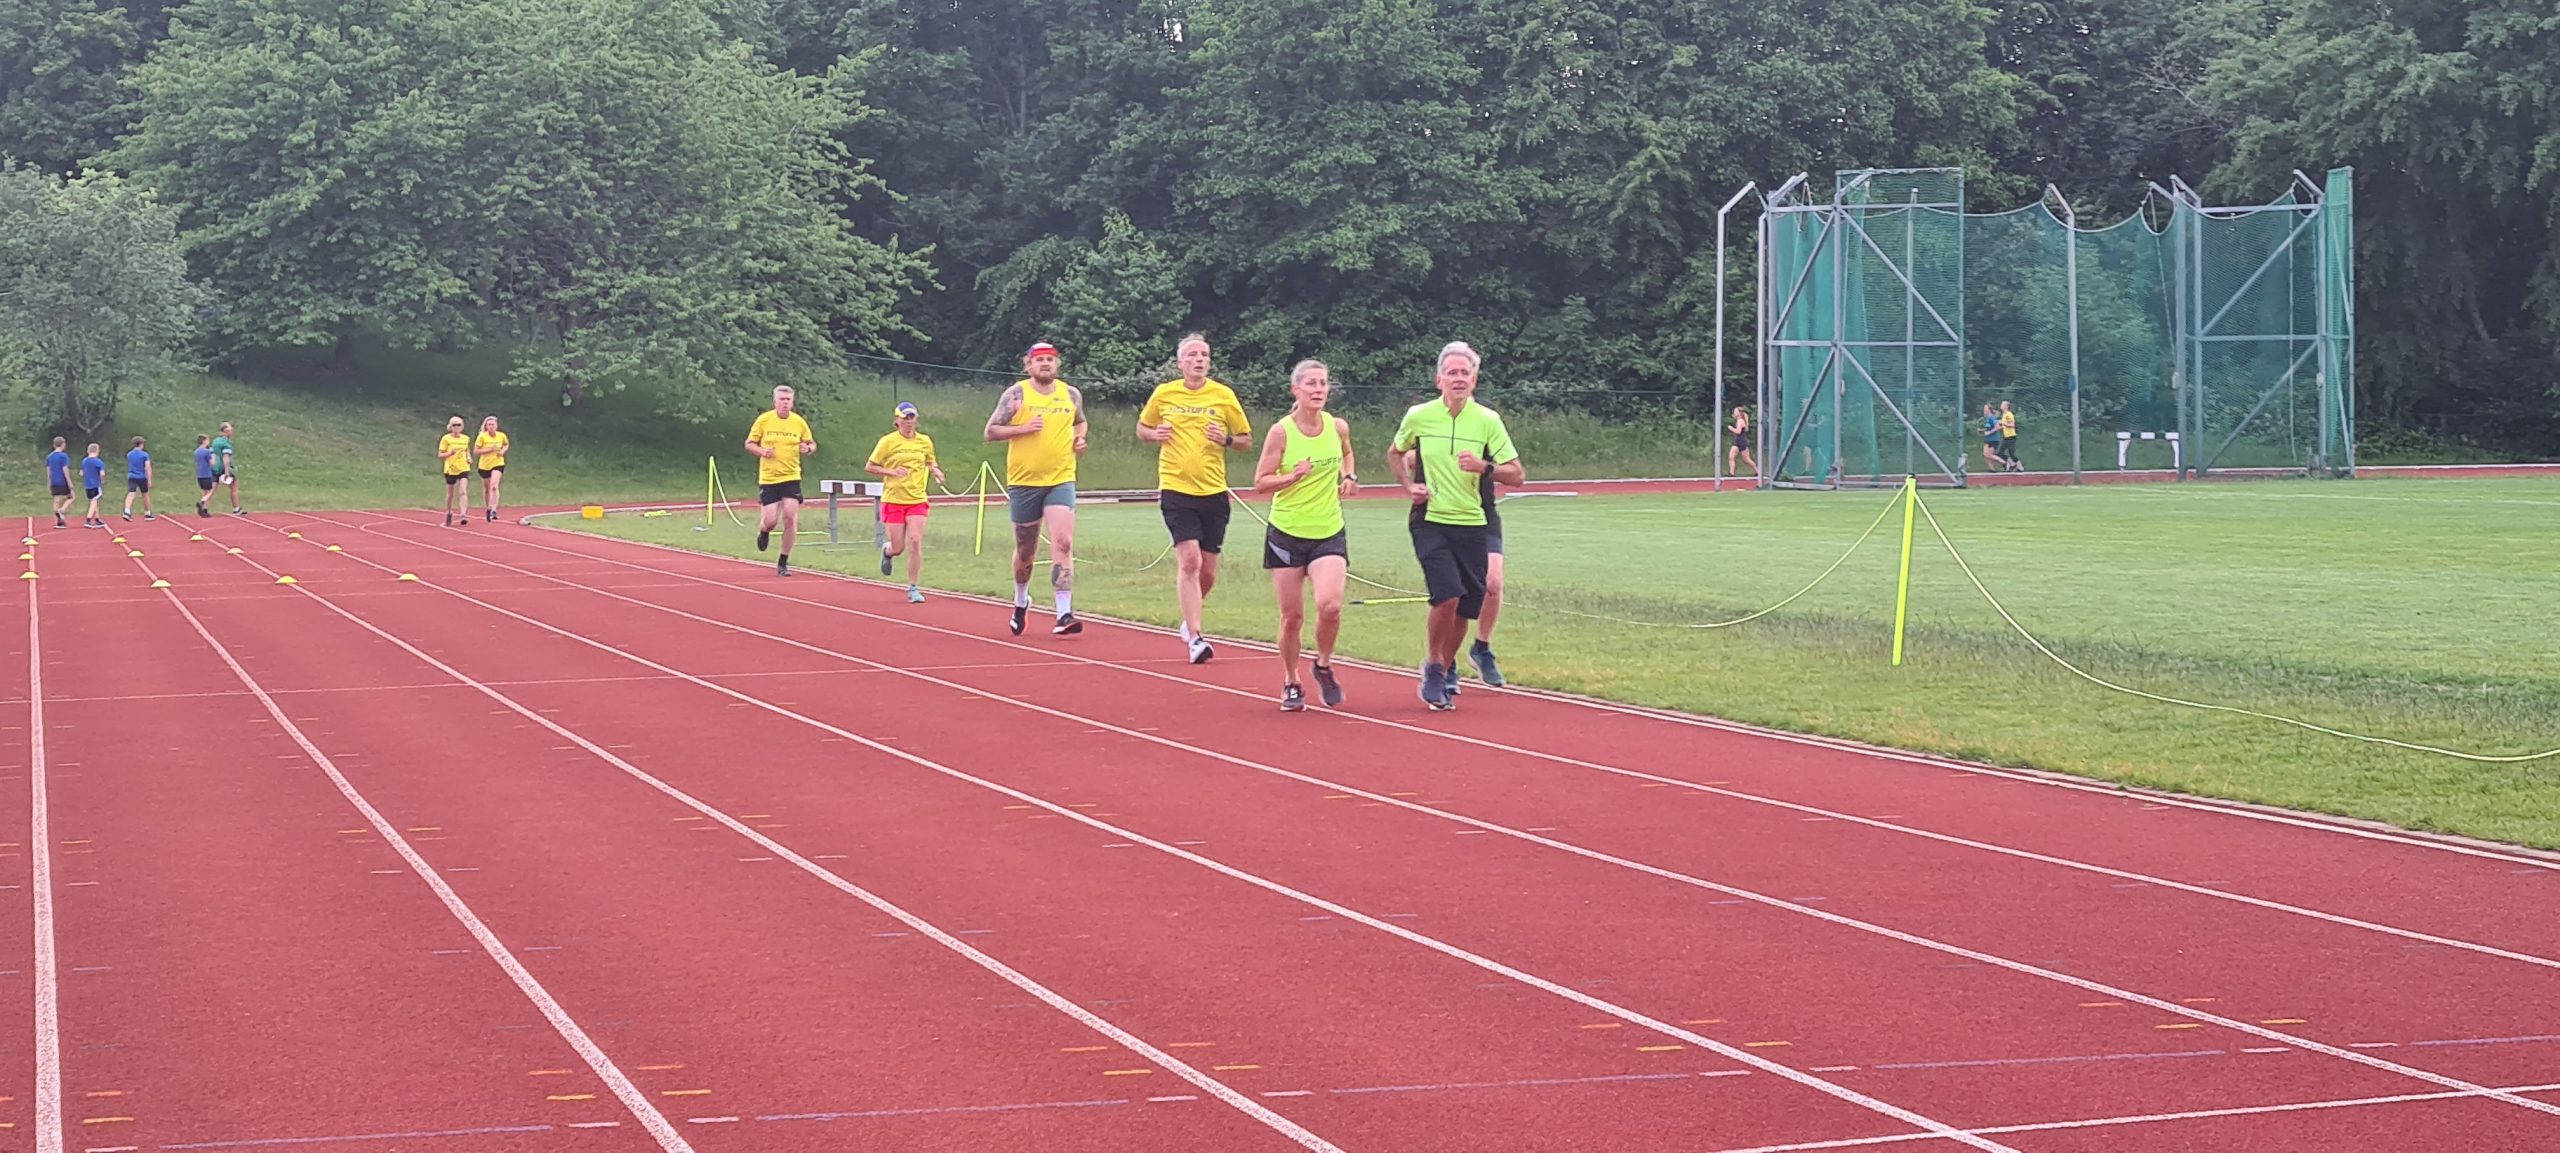 Track evening session runners